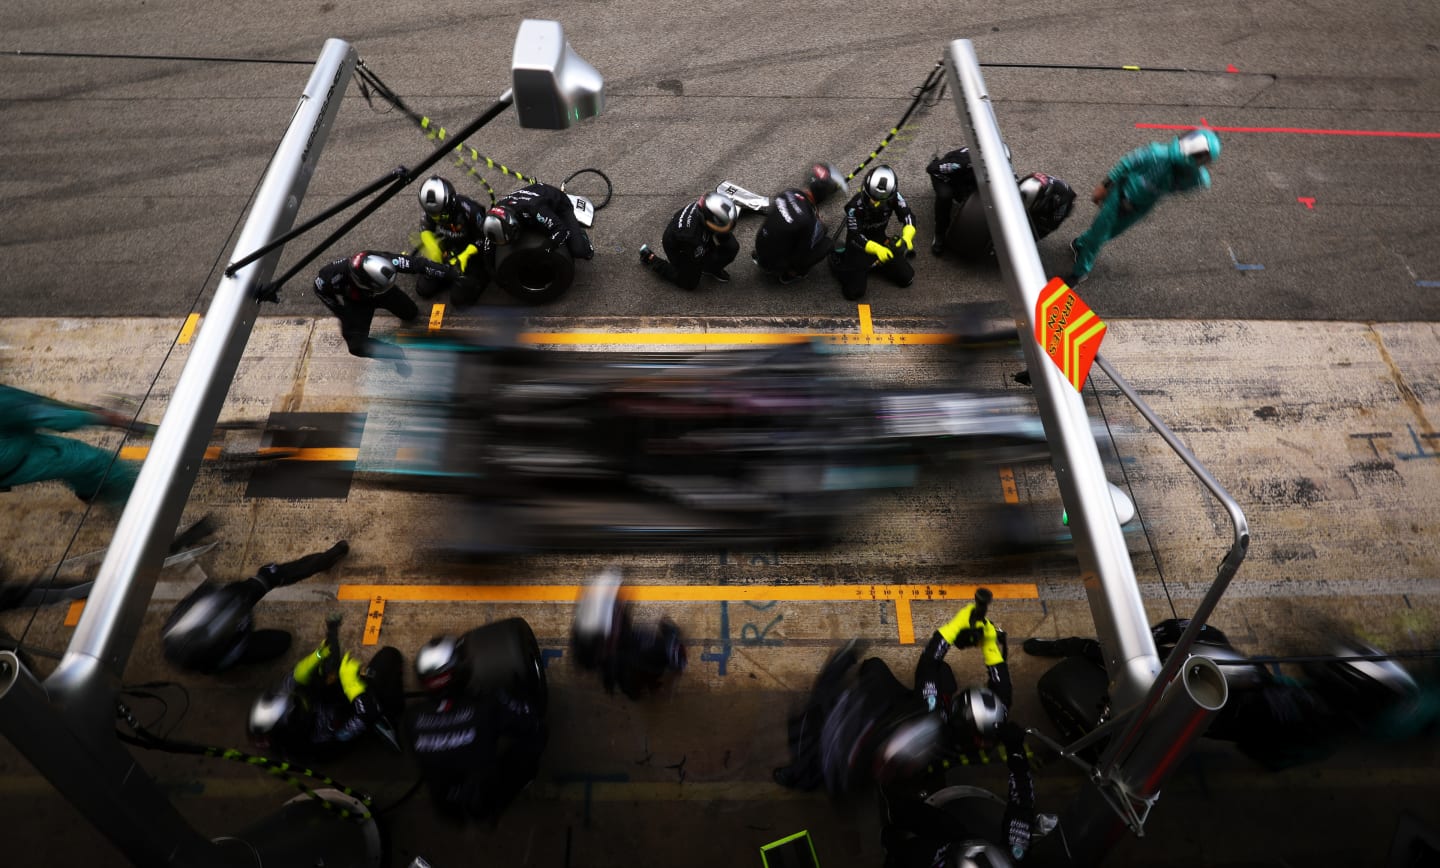 BARCELONA, SPAIN - AUGUST 16: Lewis Hamilton of Great Britain driving the (44) Mercedes AMG Petronas F1 Team Mercedes W11 comes in for a tyre change during the F1 Grand Prix of Spain at Circuit de Barcelona-Catalunya on August 16, 2020 in Barcelona, Spain. (Photo by Albert Gea/Pool via Getty Images)